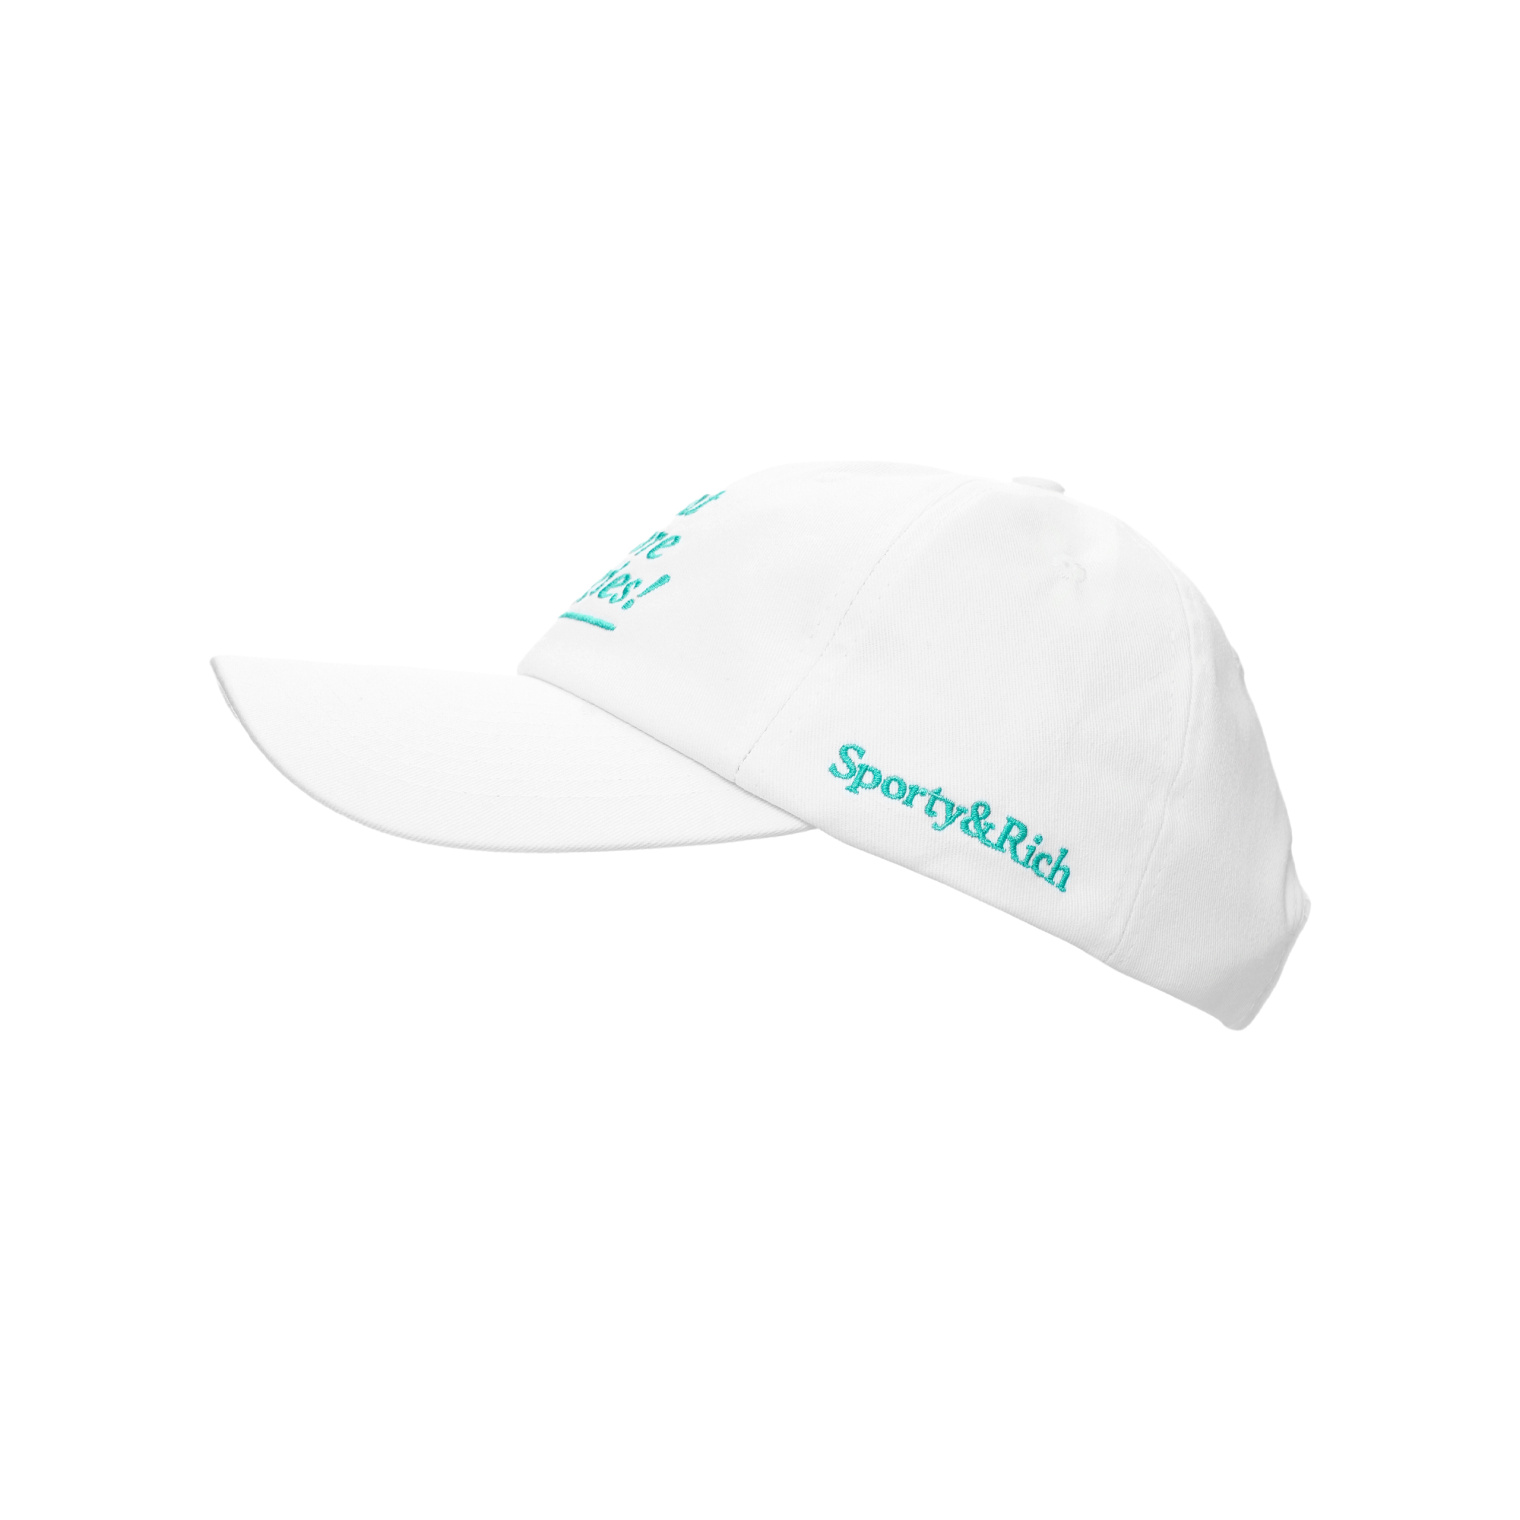 SPORTY & RICH \'Eat more veggies\' embroidered cap